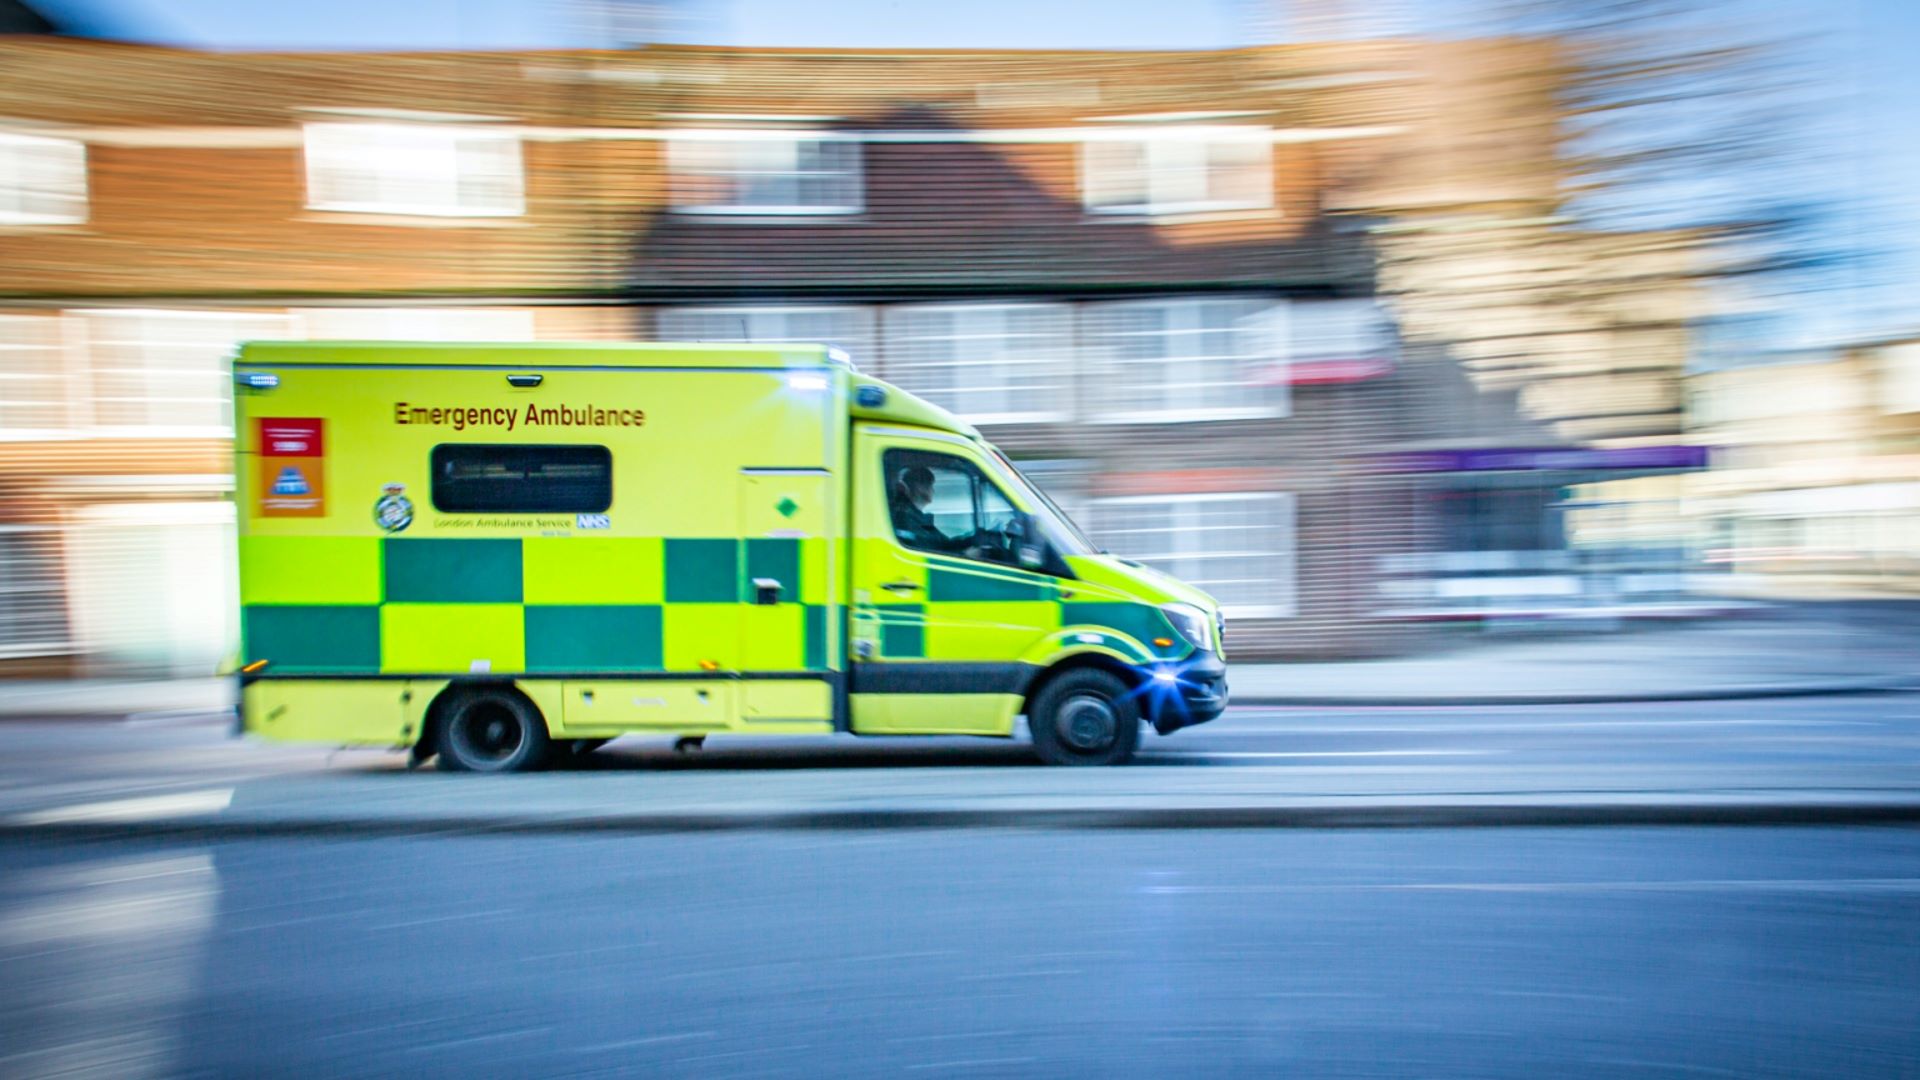 An image of an ambulance being driven on a road with some houses blurred in the background.